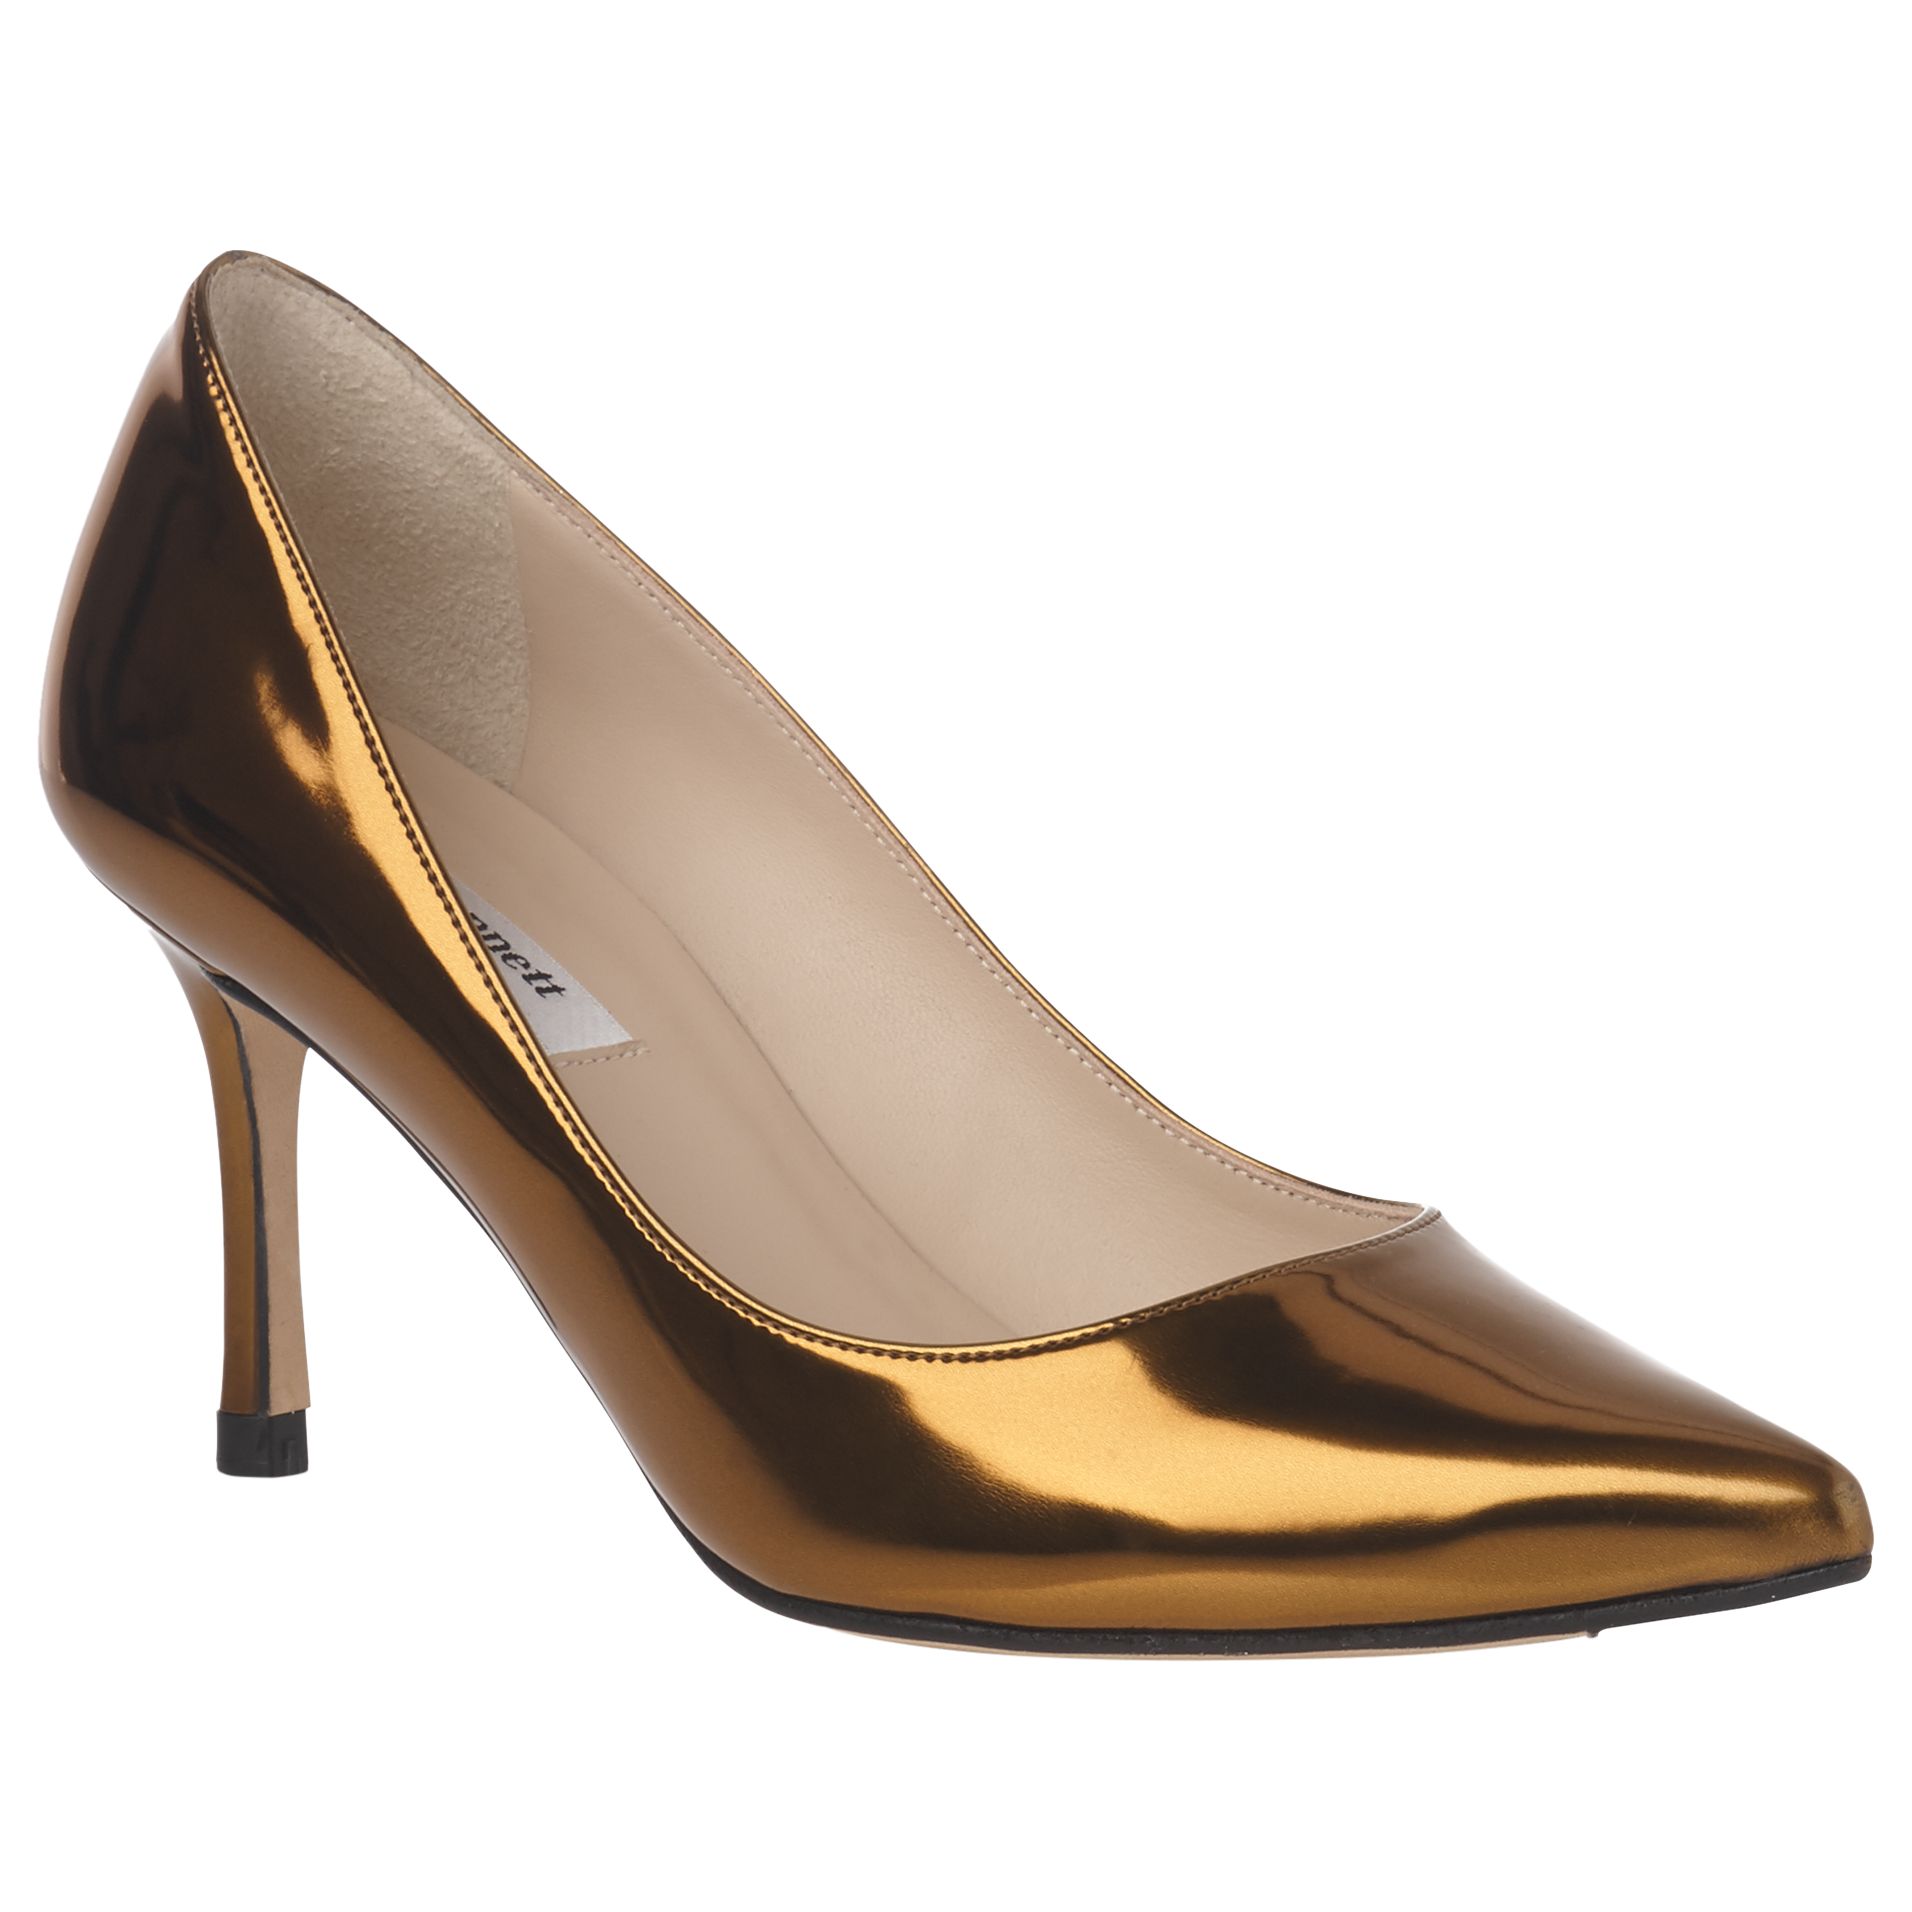 L.K. Bennett Bianca Pointed Toe Court Shoes